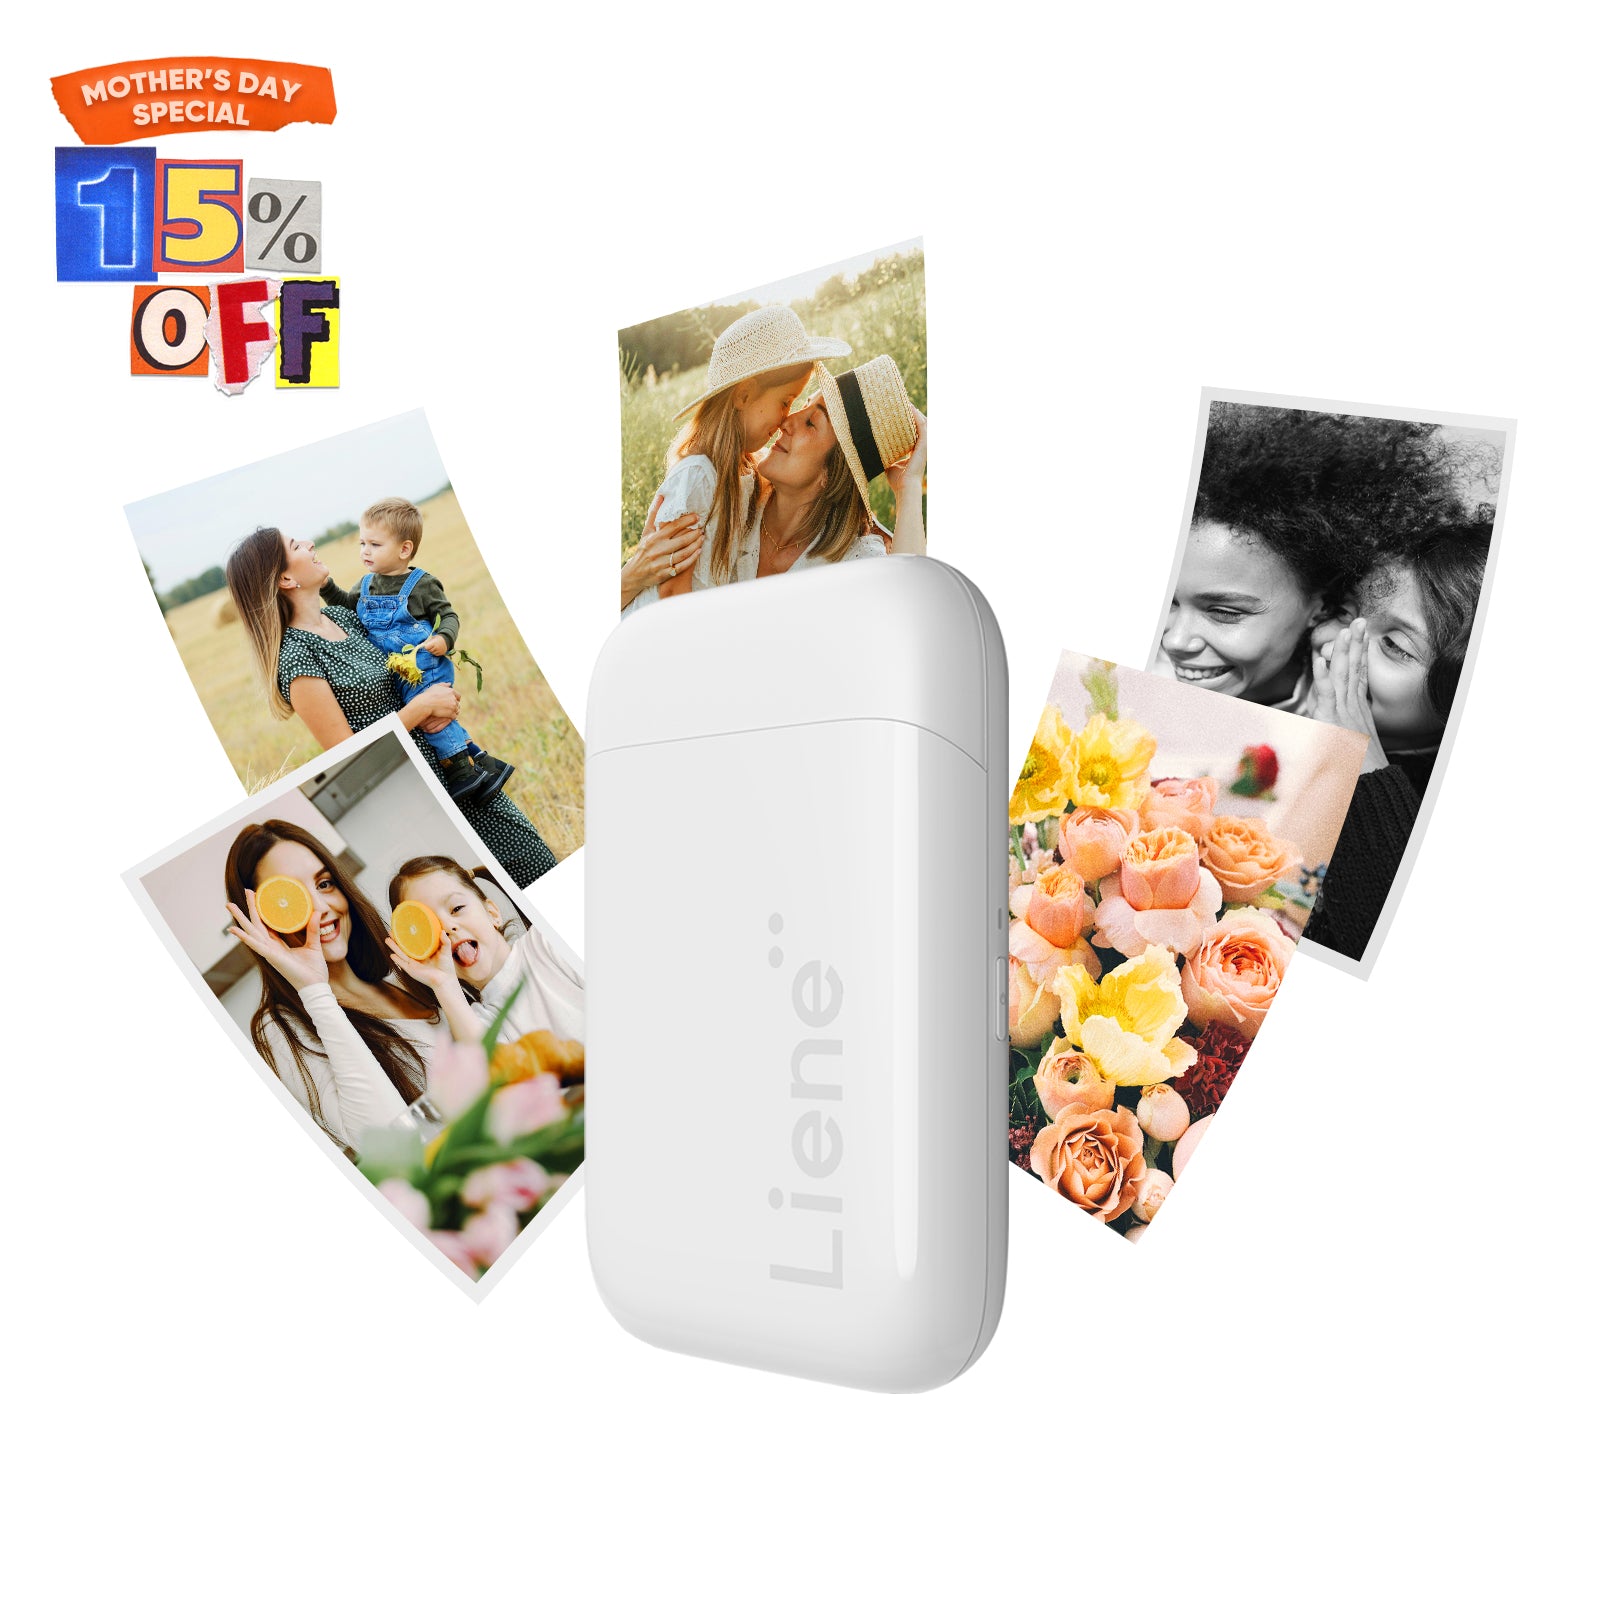 Liene Pearl K100 2x3" Portable Photo Printer - White (5 Zink Photo Papers)